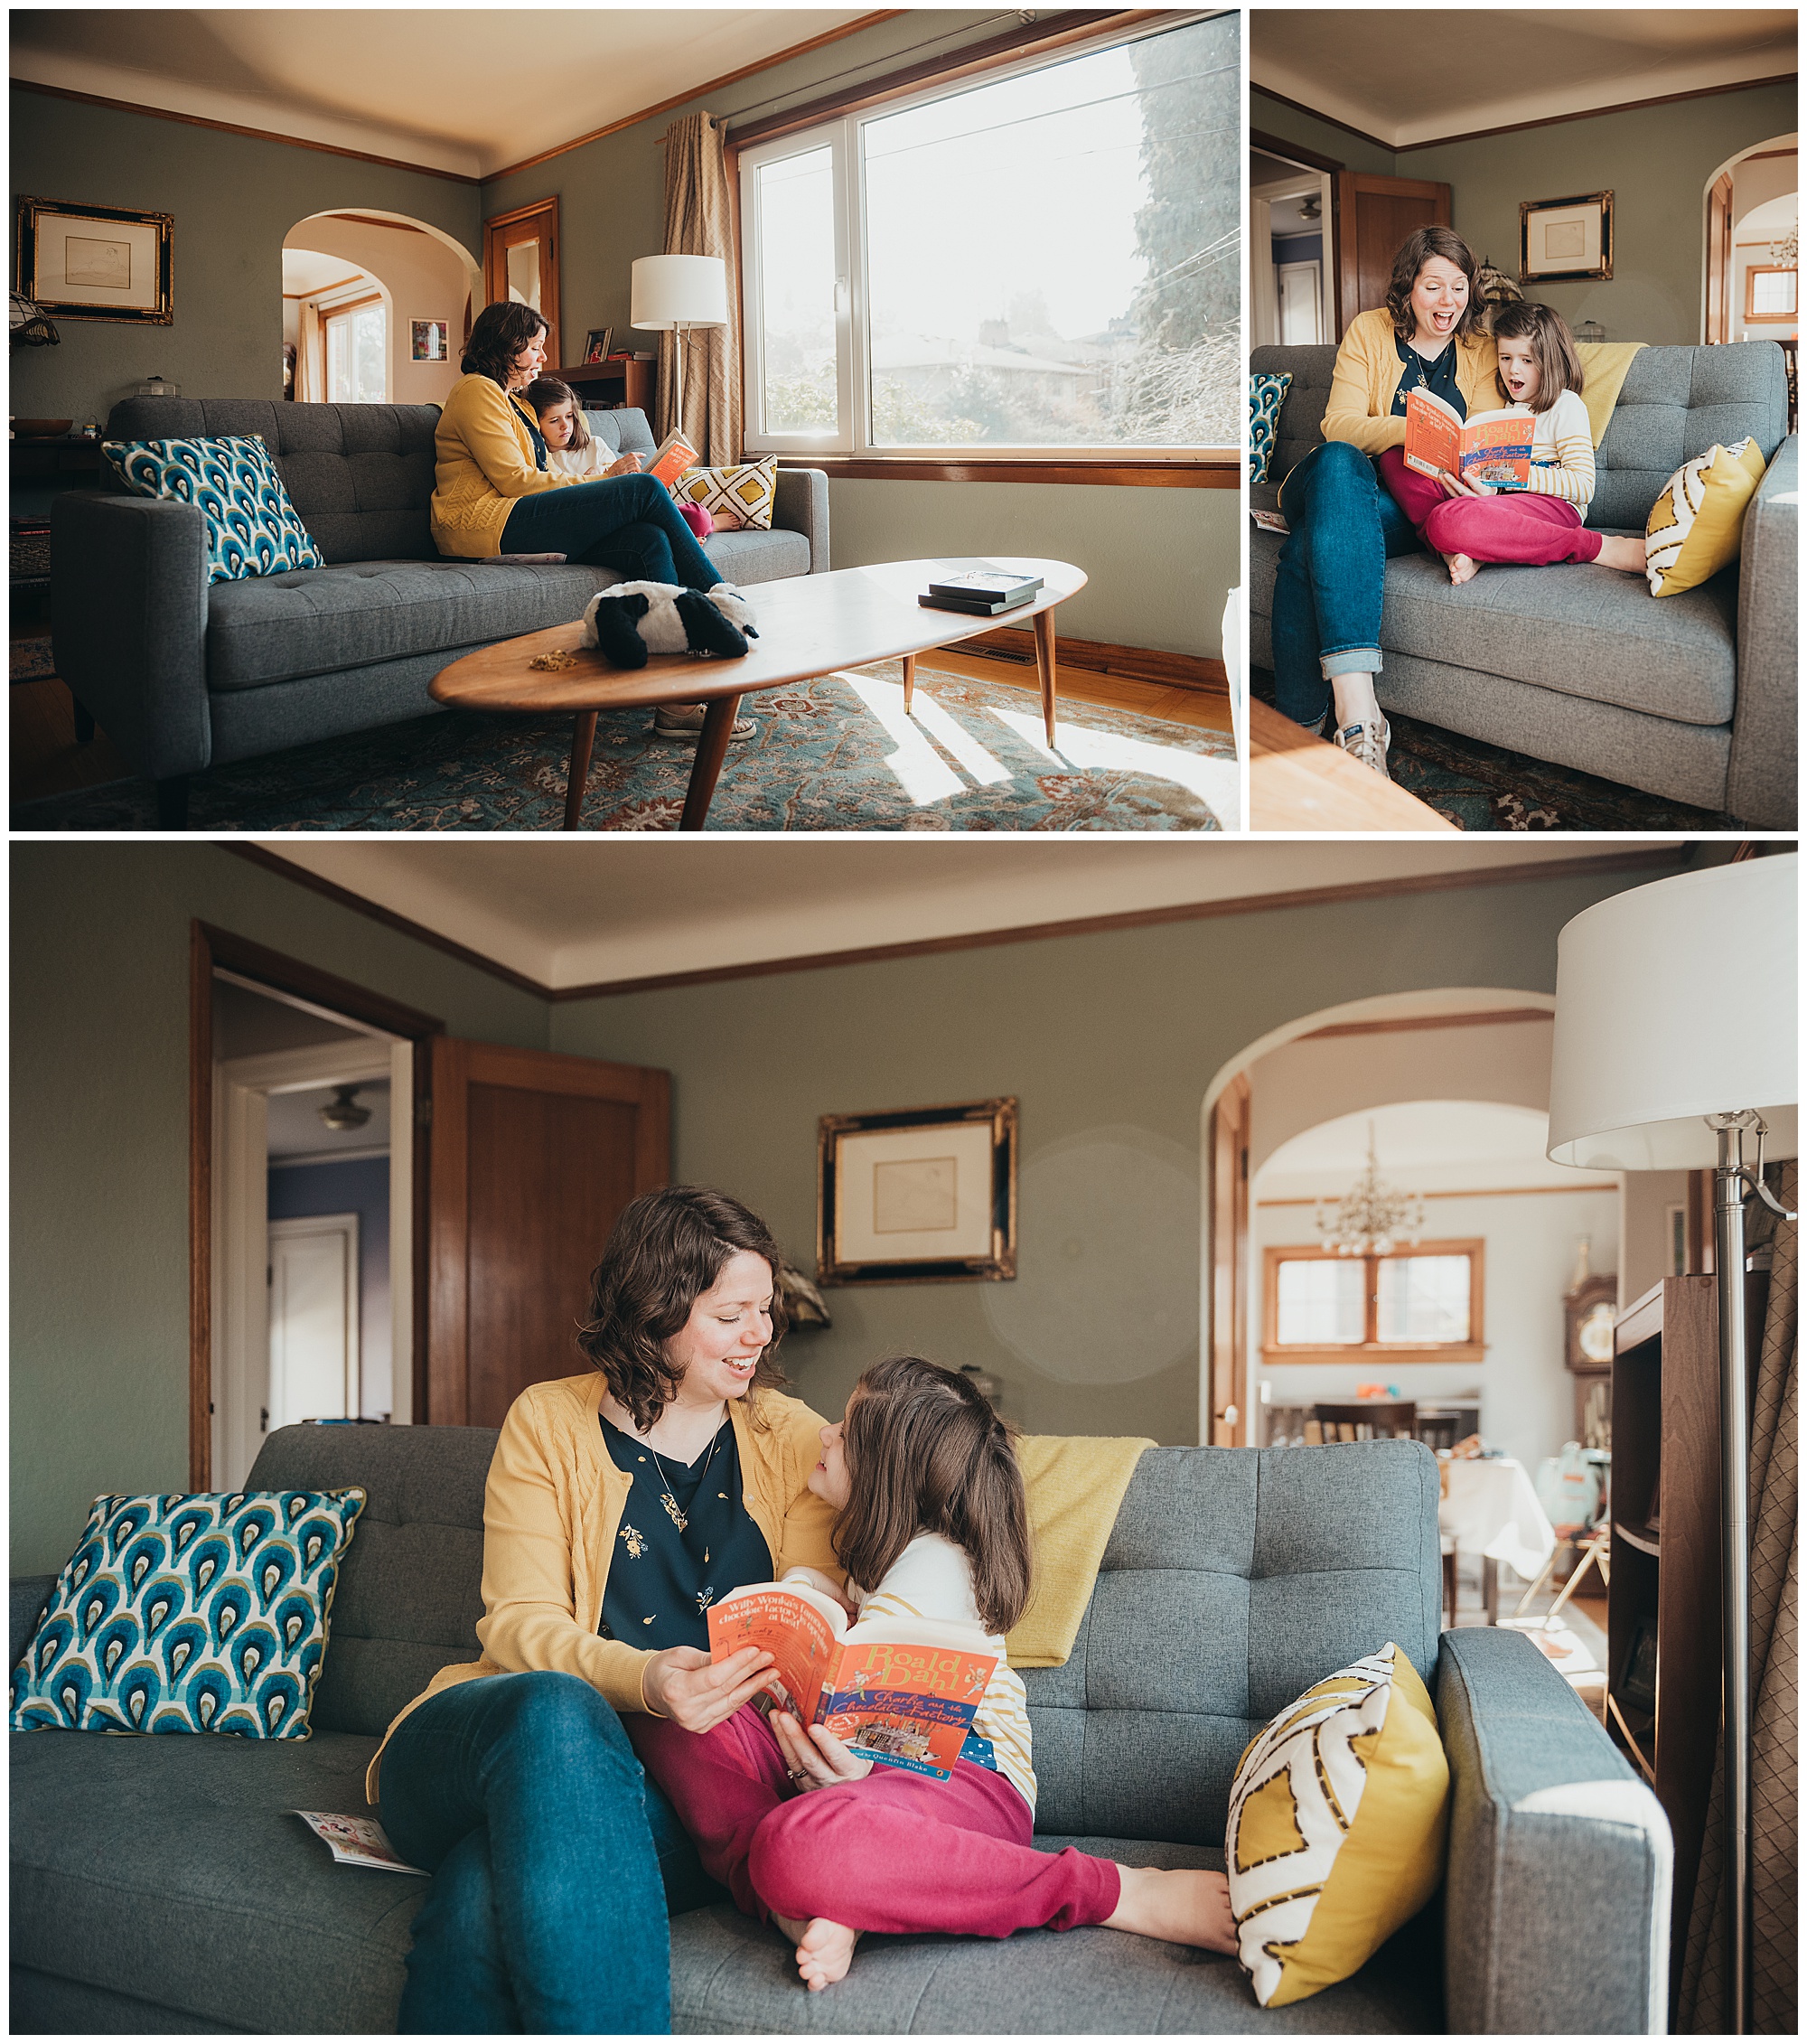 Collage of Mom and daughter reading on couch in living room big picture window Emily Ann Photography Seattle Photographer